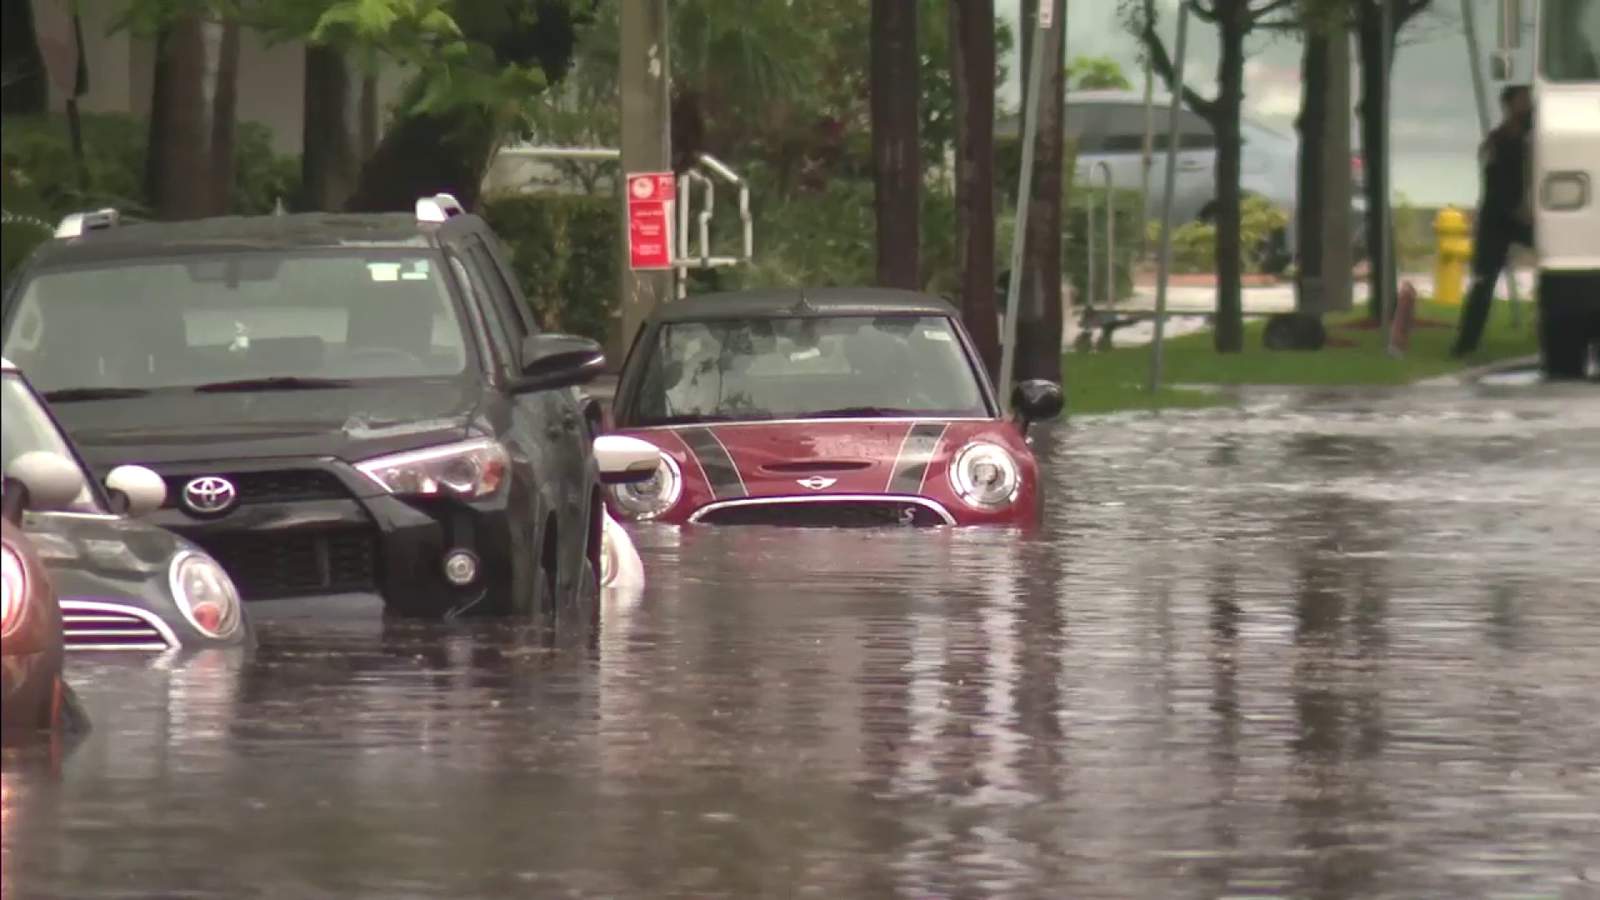 Heavy rain brings flooding to parts of Miami-Dade and Broward, causing confusion for daily passengers